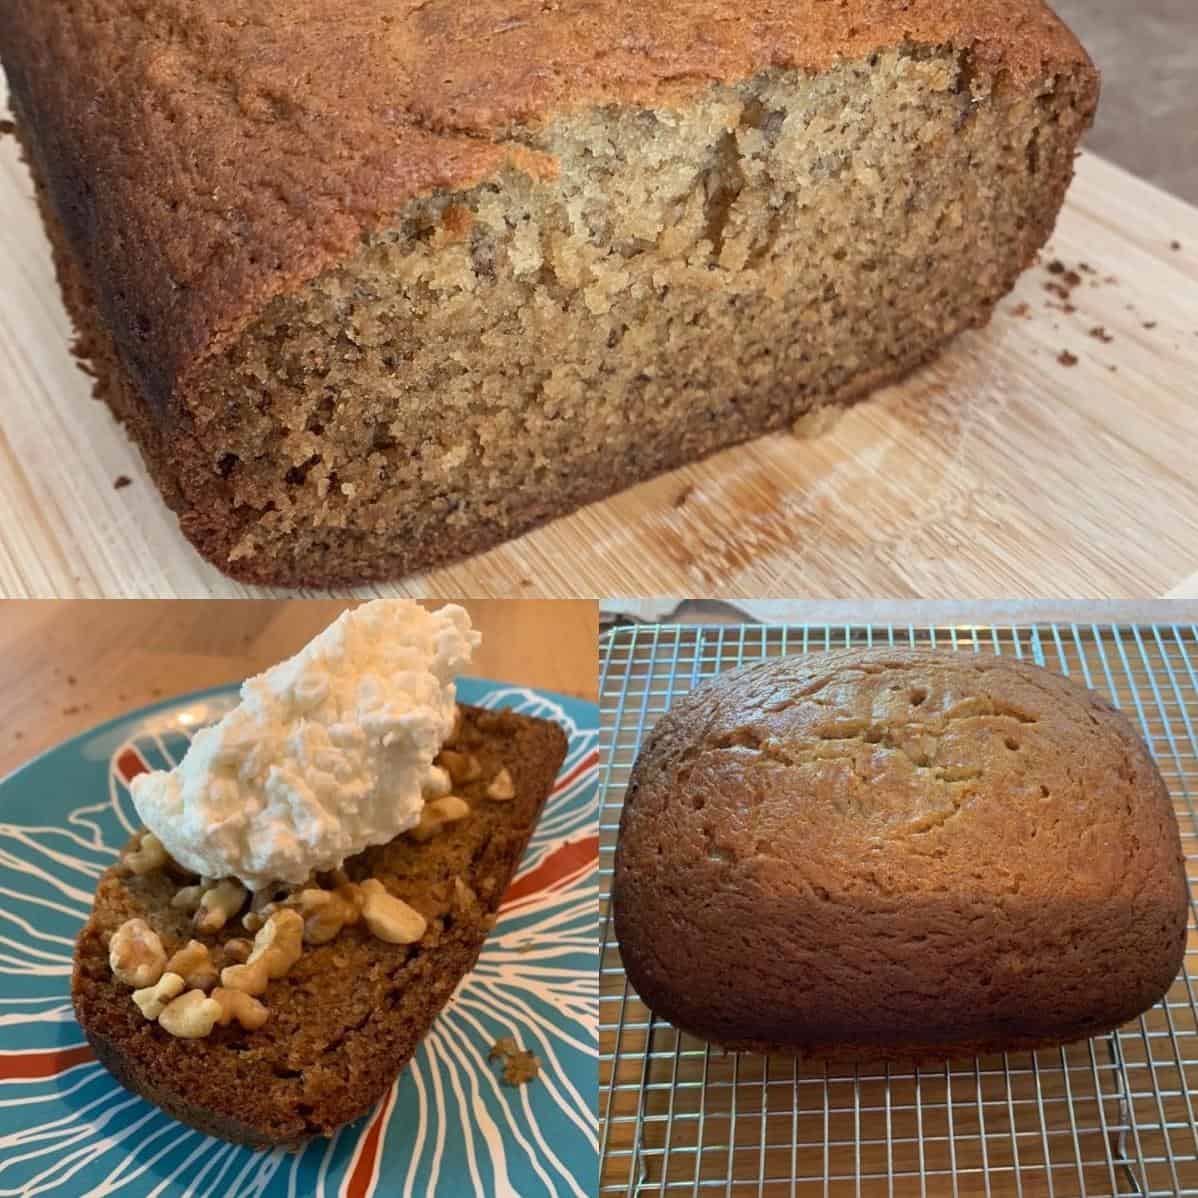  Move over, pumpkin spice - this sweet and nutty banana bread is the real star of fall.